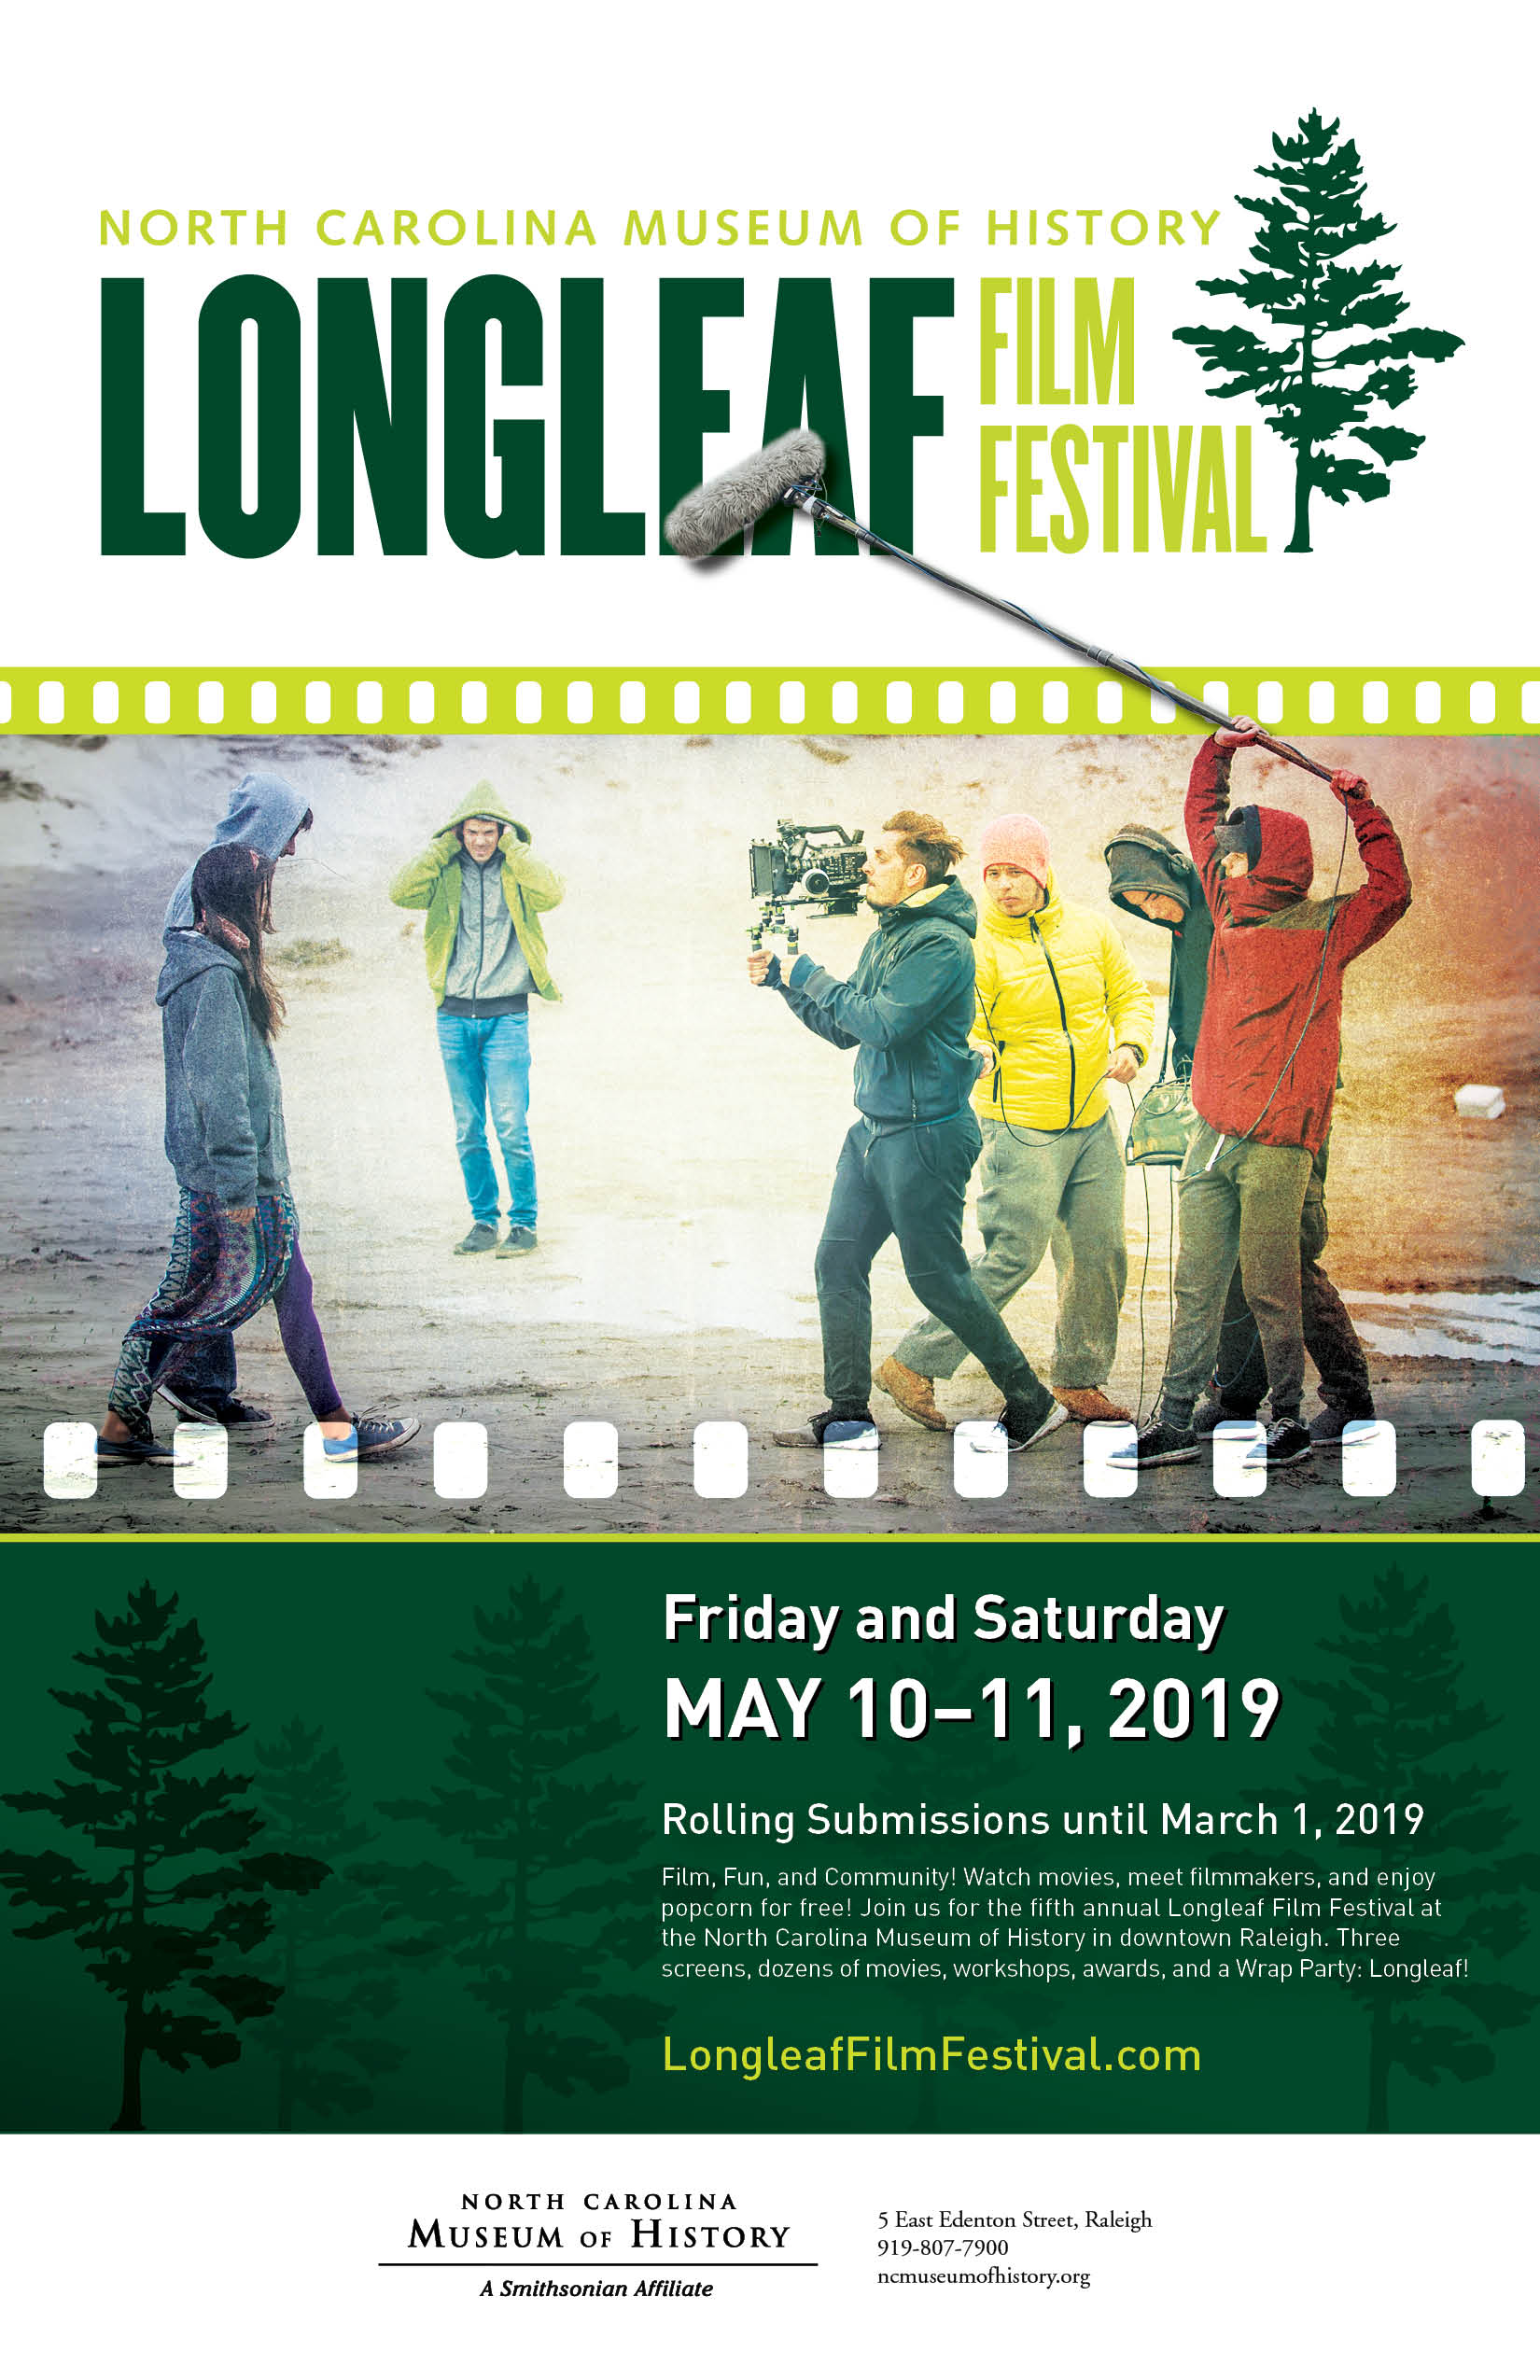 Longleaf Film Festival is sponsored by the North Carolina Museum of History.